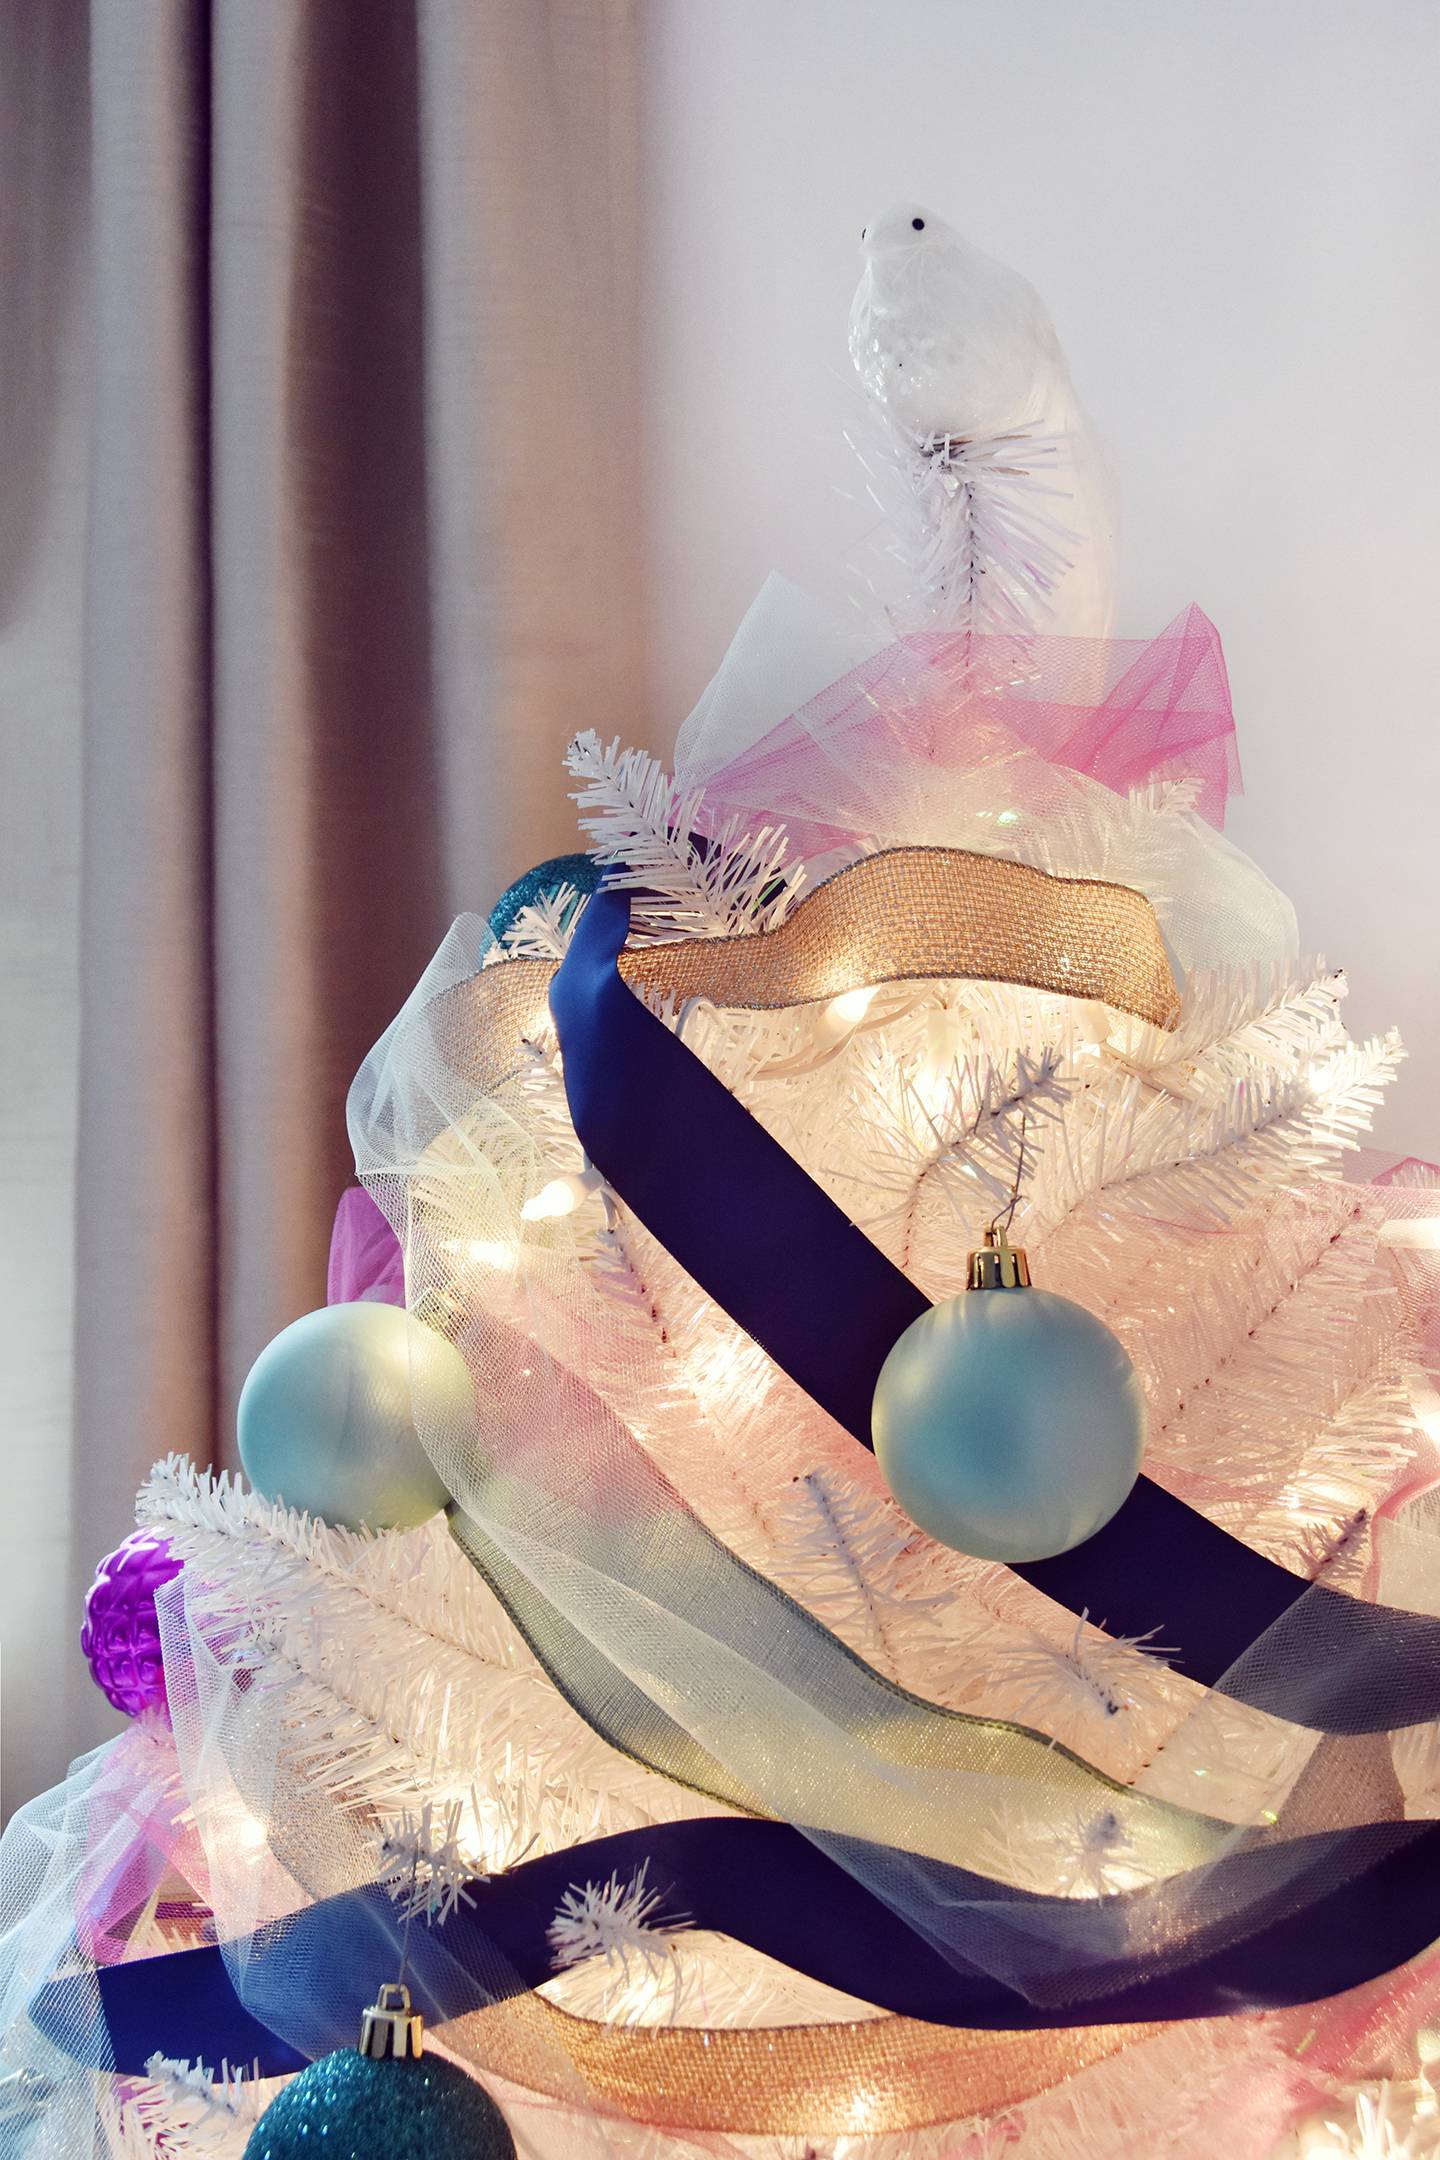 How To Decorate A Christmas Tree With Ribbon | Curbly #christmas #holiday #ribbon #nontraditional #unique